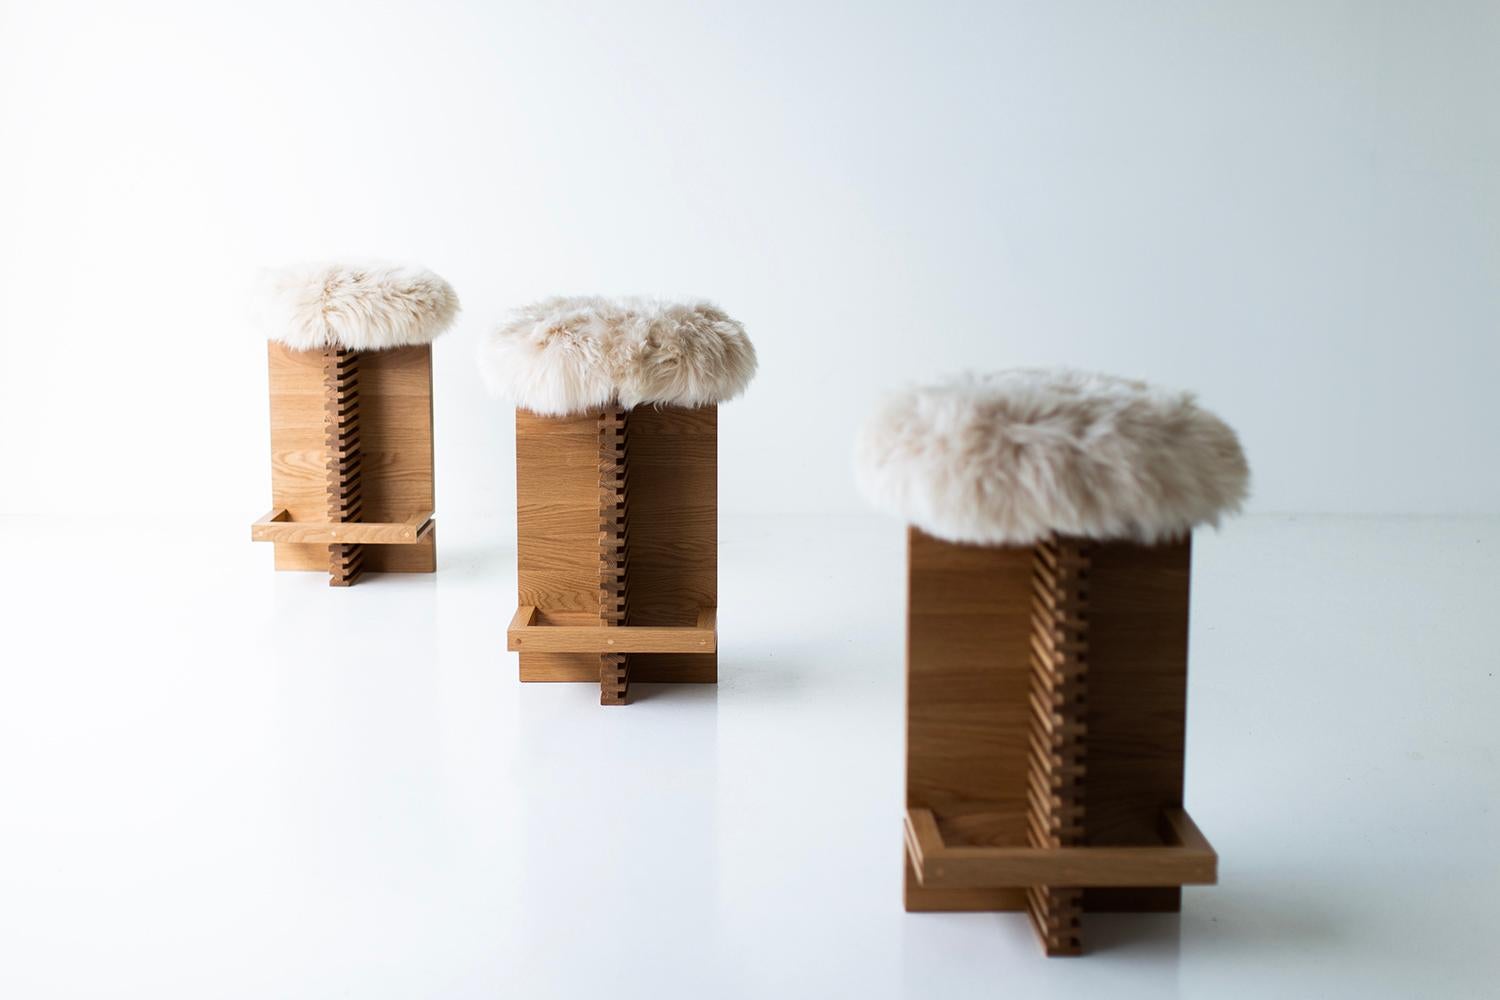 Bertu Counter Stool, Cicely Modern Sheepskin Counter Stool, White Oak 

This Modern Cicely Counter Stool with Sheepskin Seat is beautifully constructed from solid white oak in Ohio, USA. This stool was style-spotted at the Spring 2022 High Point